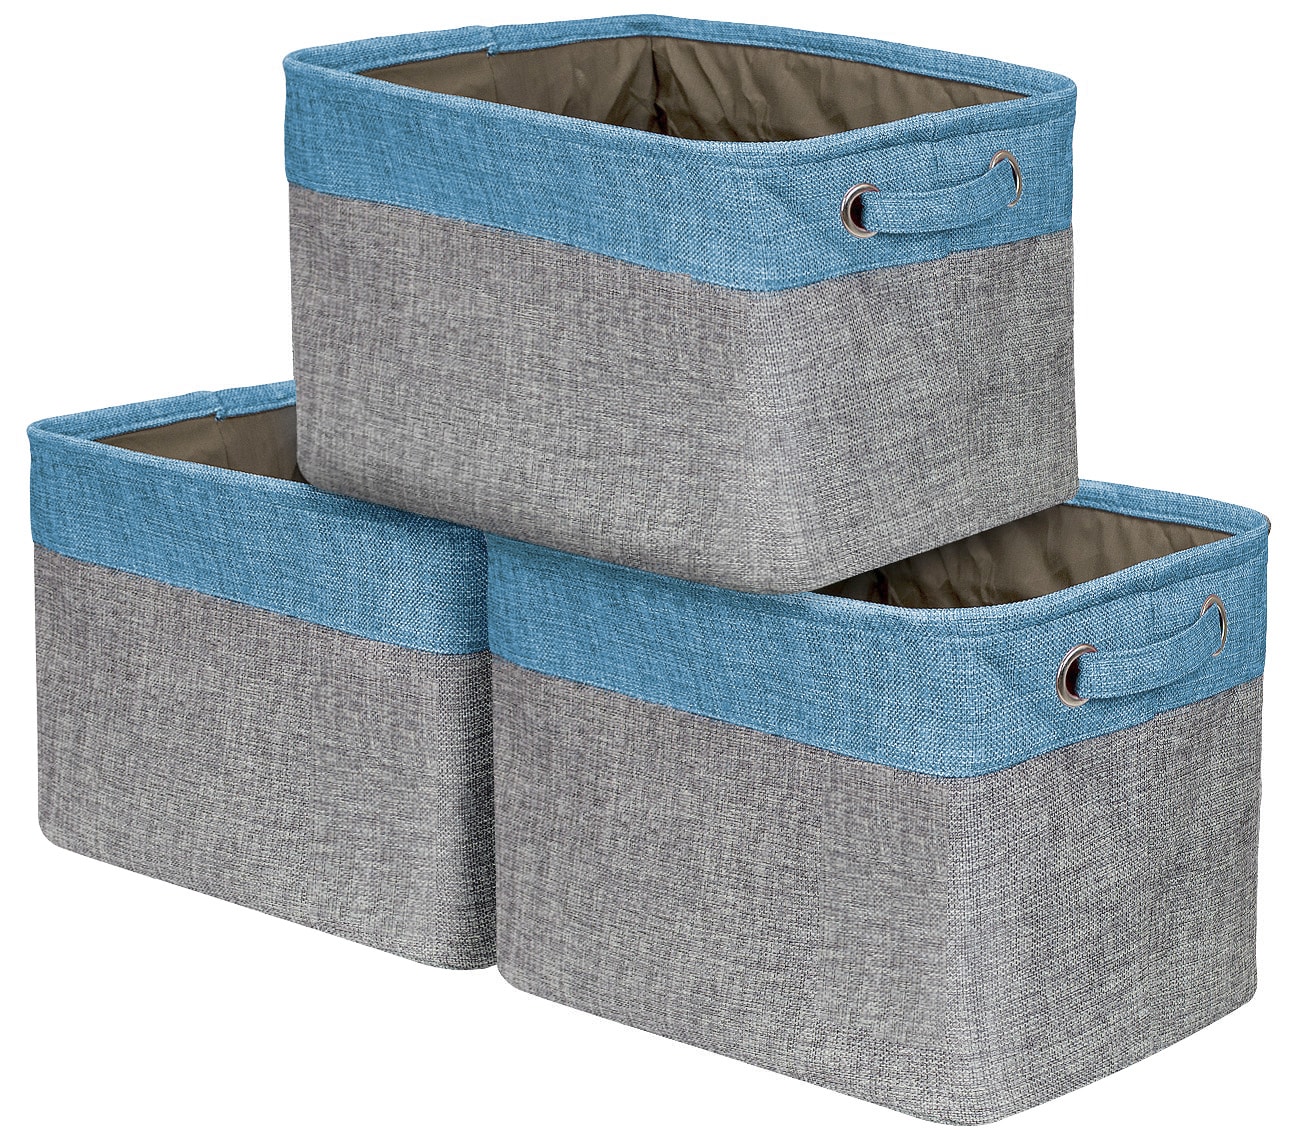 3-Pack 10.75-in W x 9.5-in H x 15-in D Gray/Blue Polyester Collapsible Bin | - SORBUS BSKT3-AQ